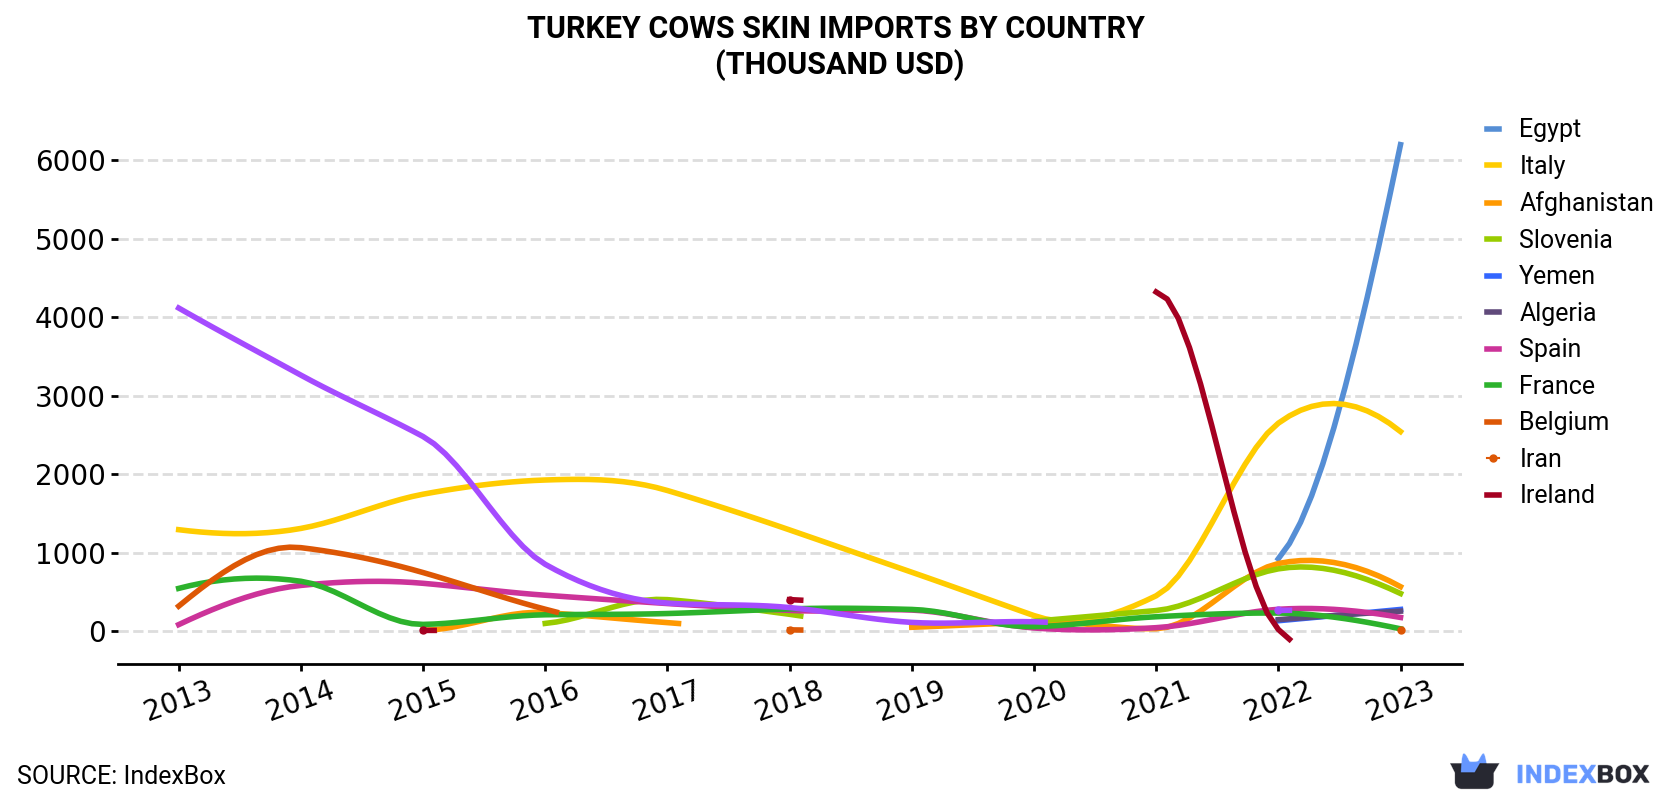 Turkey Cows Skin Imports By Country (Thousand USD)